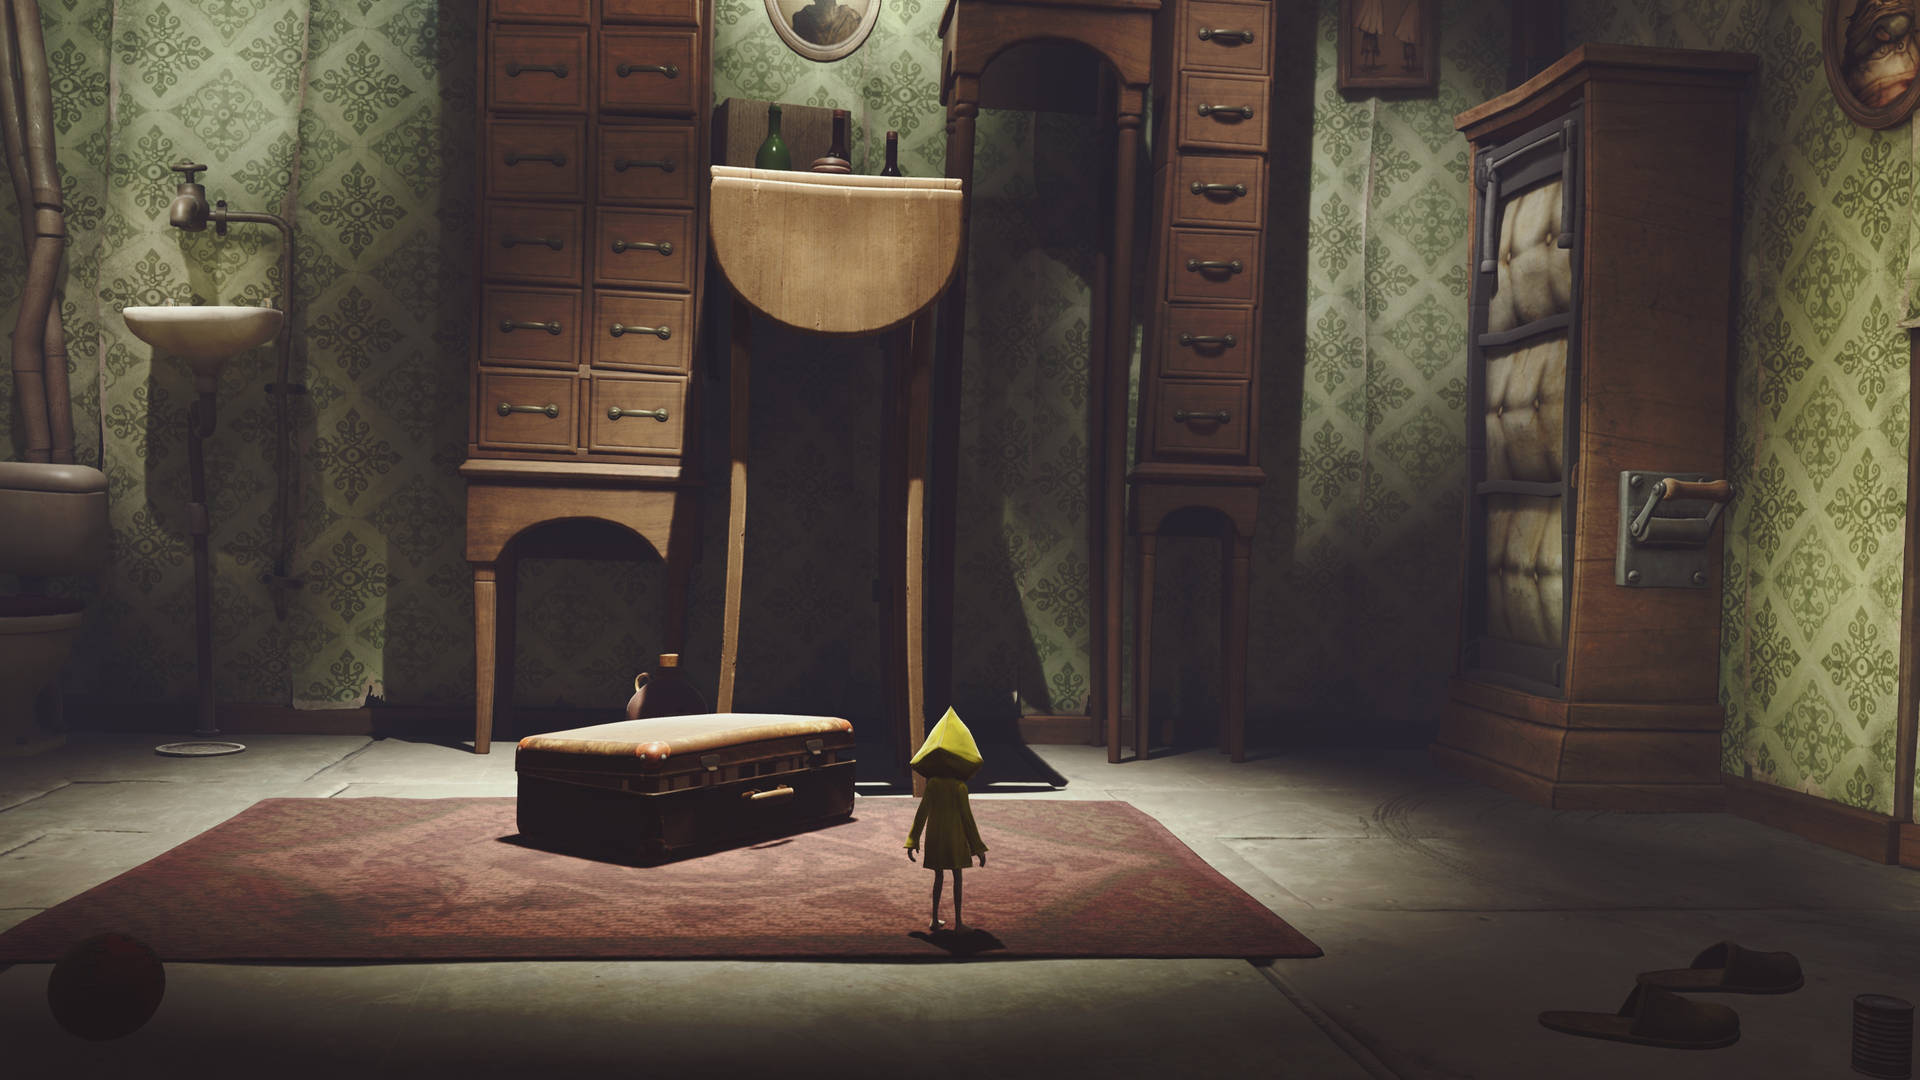 Little Nightmares The Janitor's Room Wallpaper